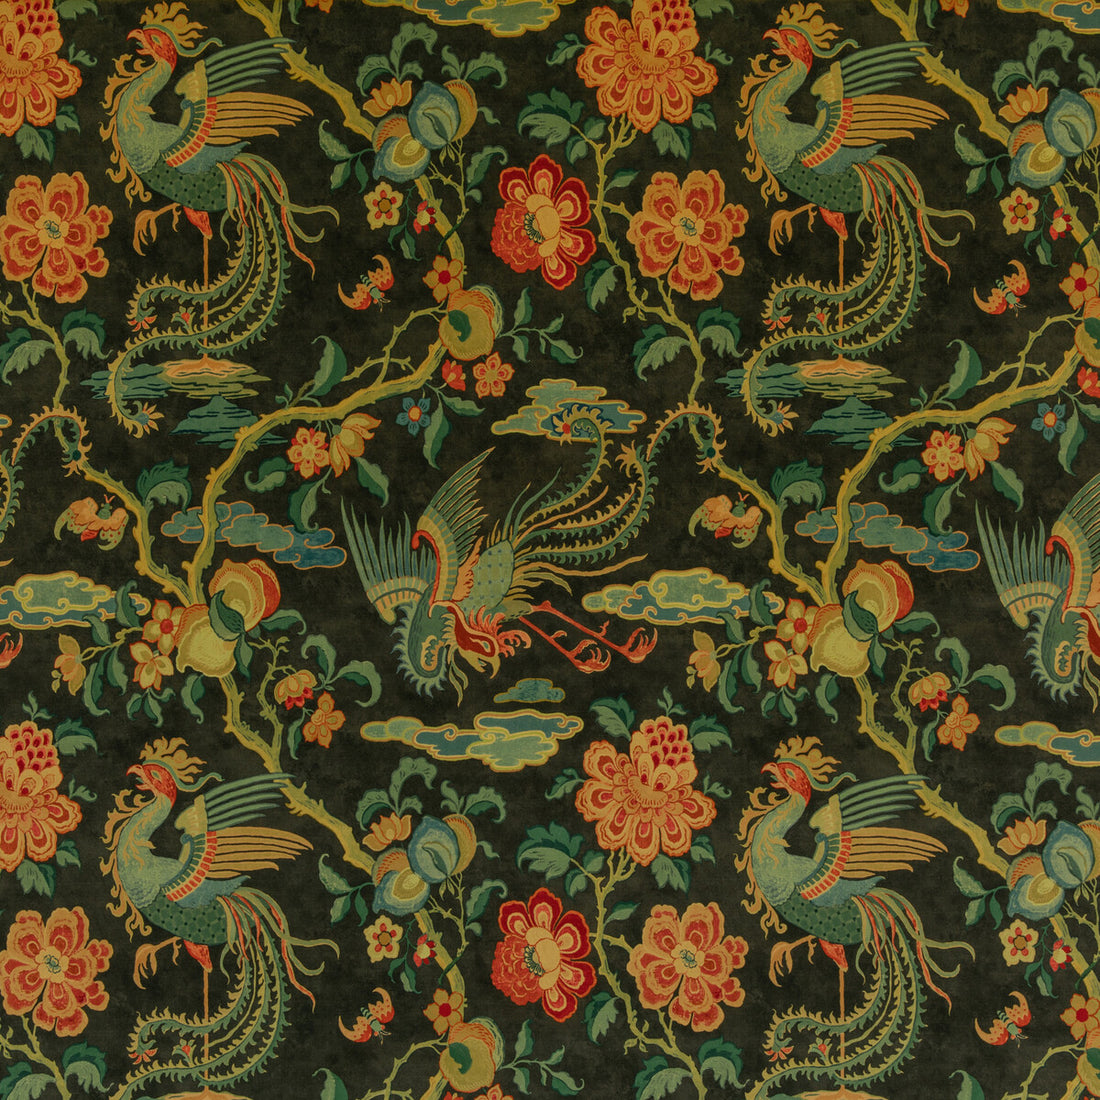 Chifu Velvet fabric in charcoal/multi color - pattern BP10854.1.0 - by G P &amp; J Baker in the Chifu collection